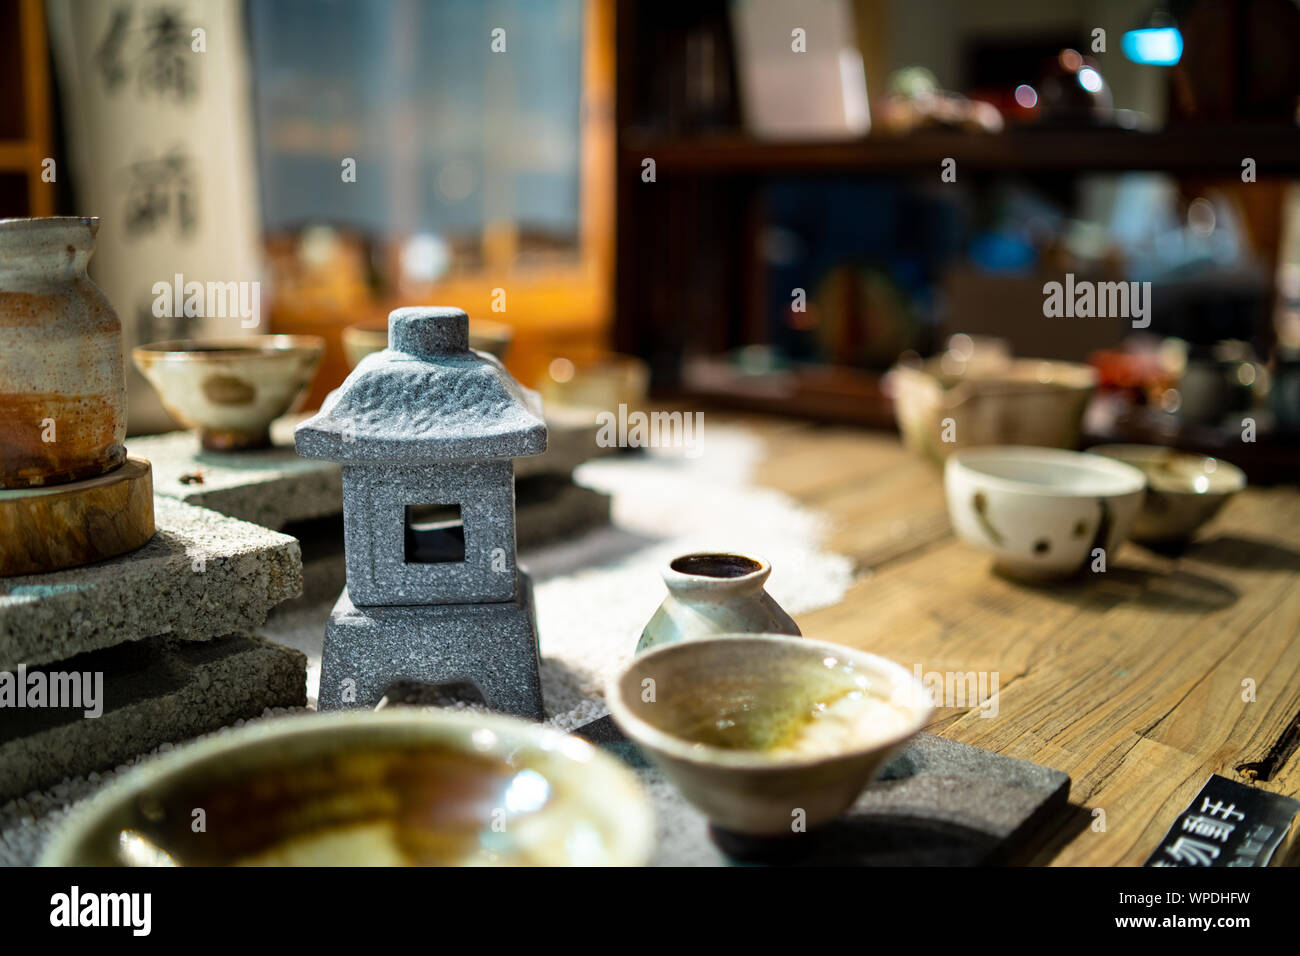 Taipei, Taiwan: Wooden table at traditional tea house in Jiufen, Taiwan. Laid with beautiful handmade, ceramic tea cups with blurry background Stock Photo